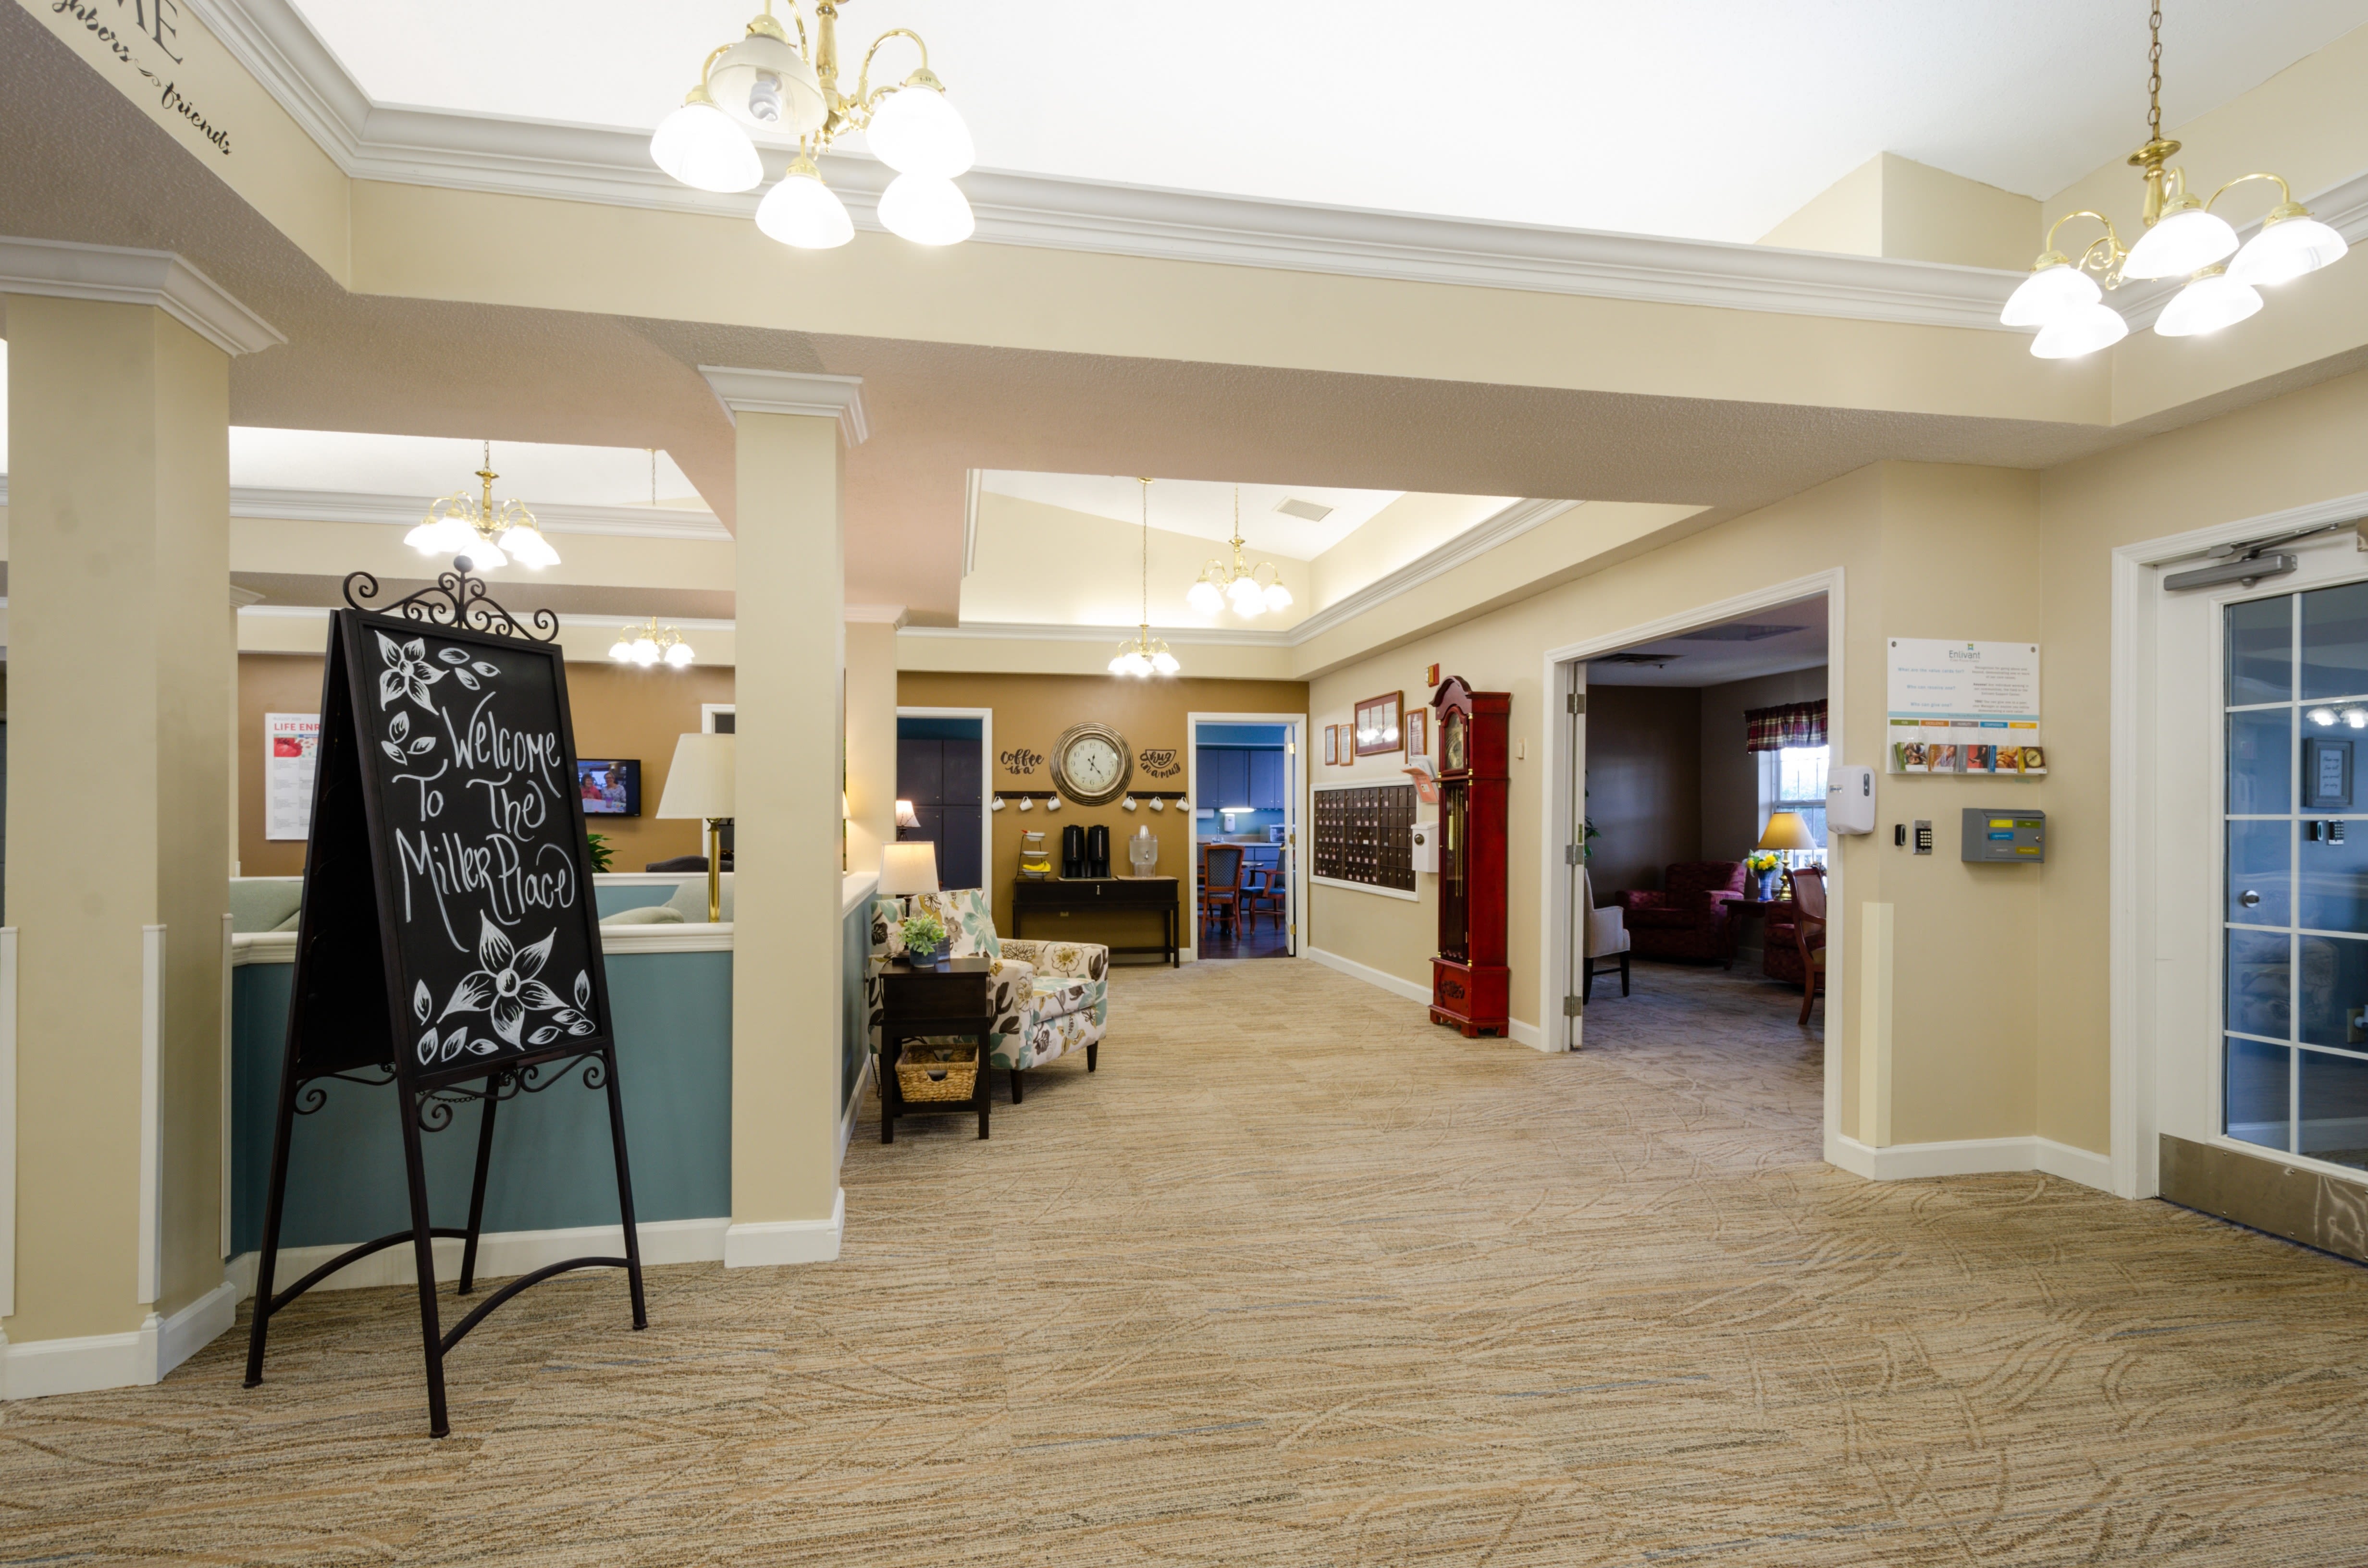 Lobby and entrance to dining area at Trustwell Living at Miller Place in Celina, Ohio